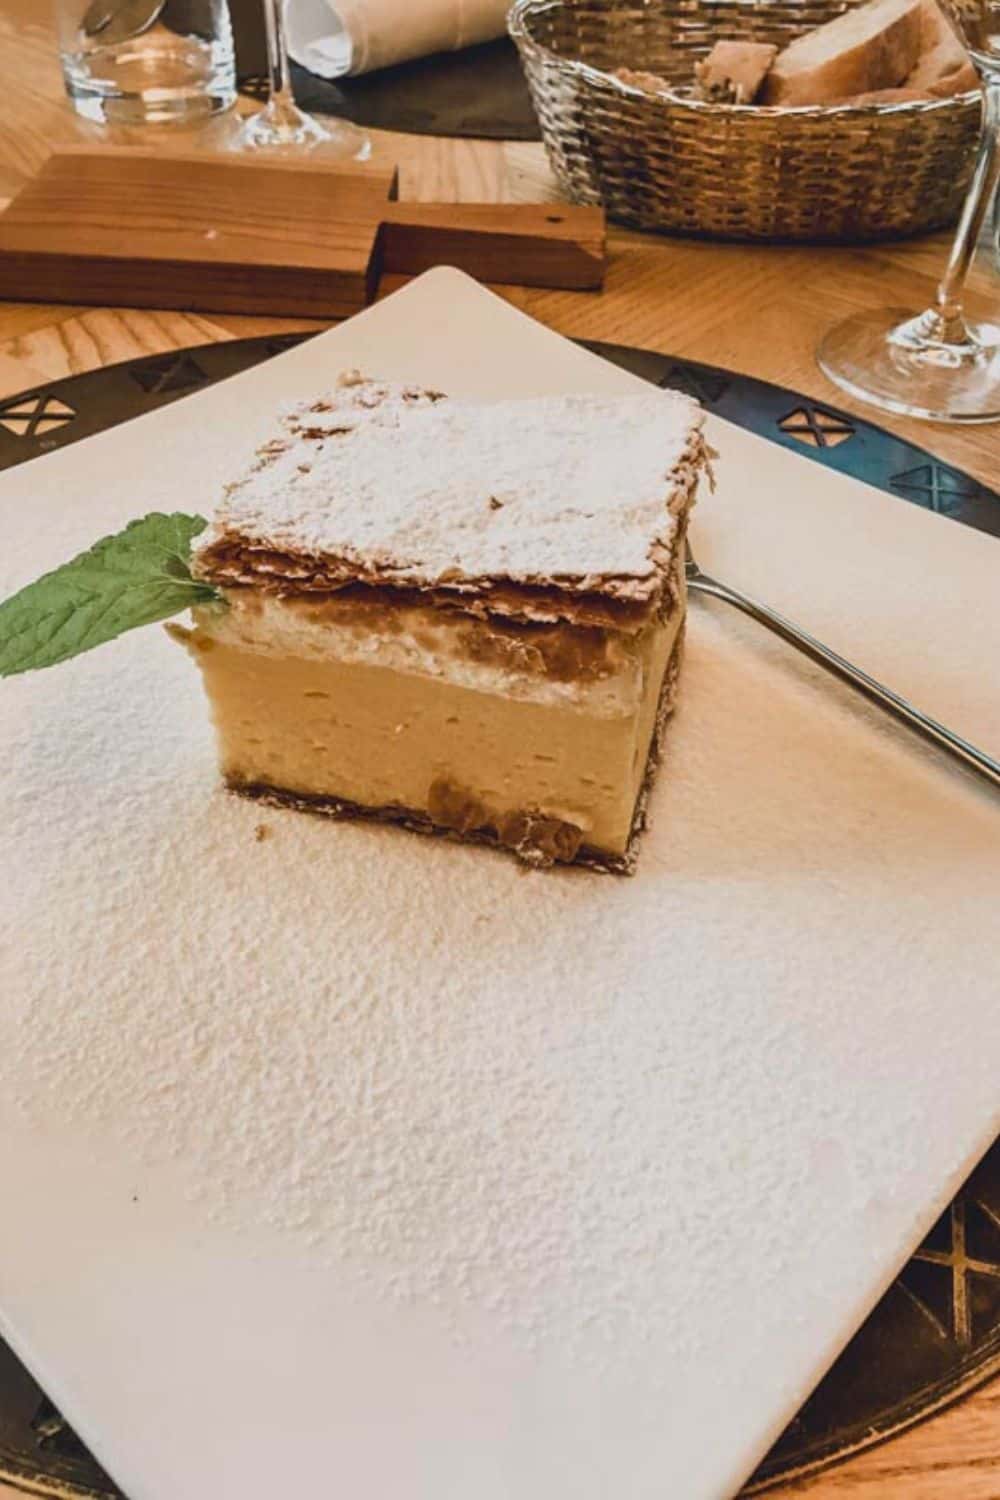 A classic piece of Bled cream cake, known as 'kremšnita,' dusted with powdered sugar and served on a white plate, symbolizing Slovenia's beloved dessert tradition.